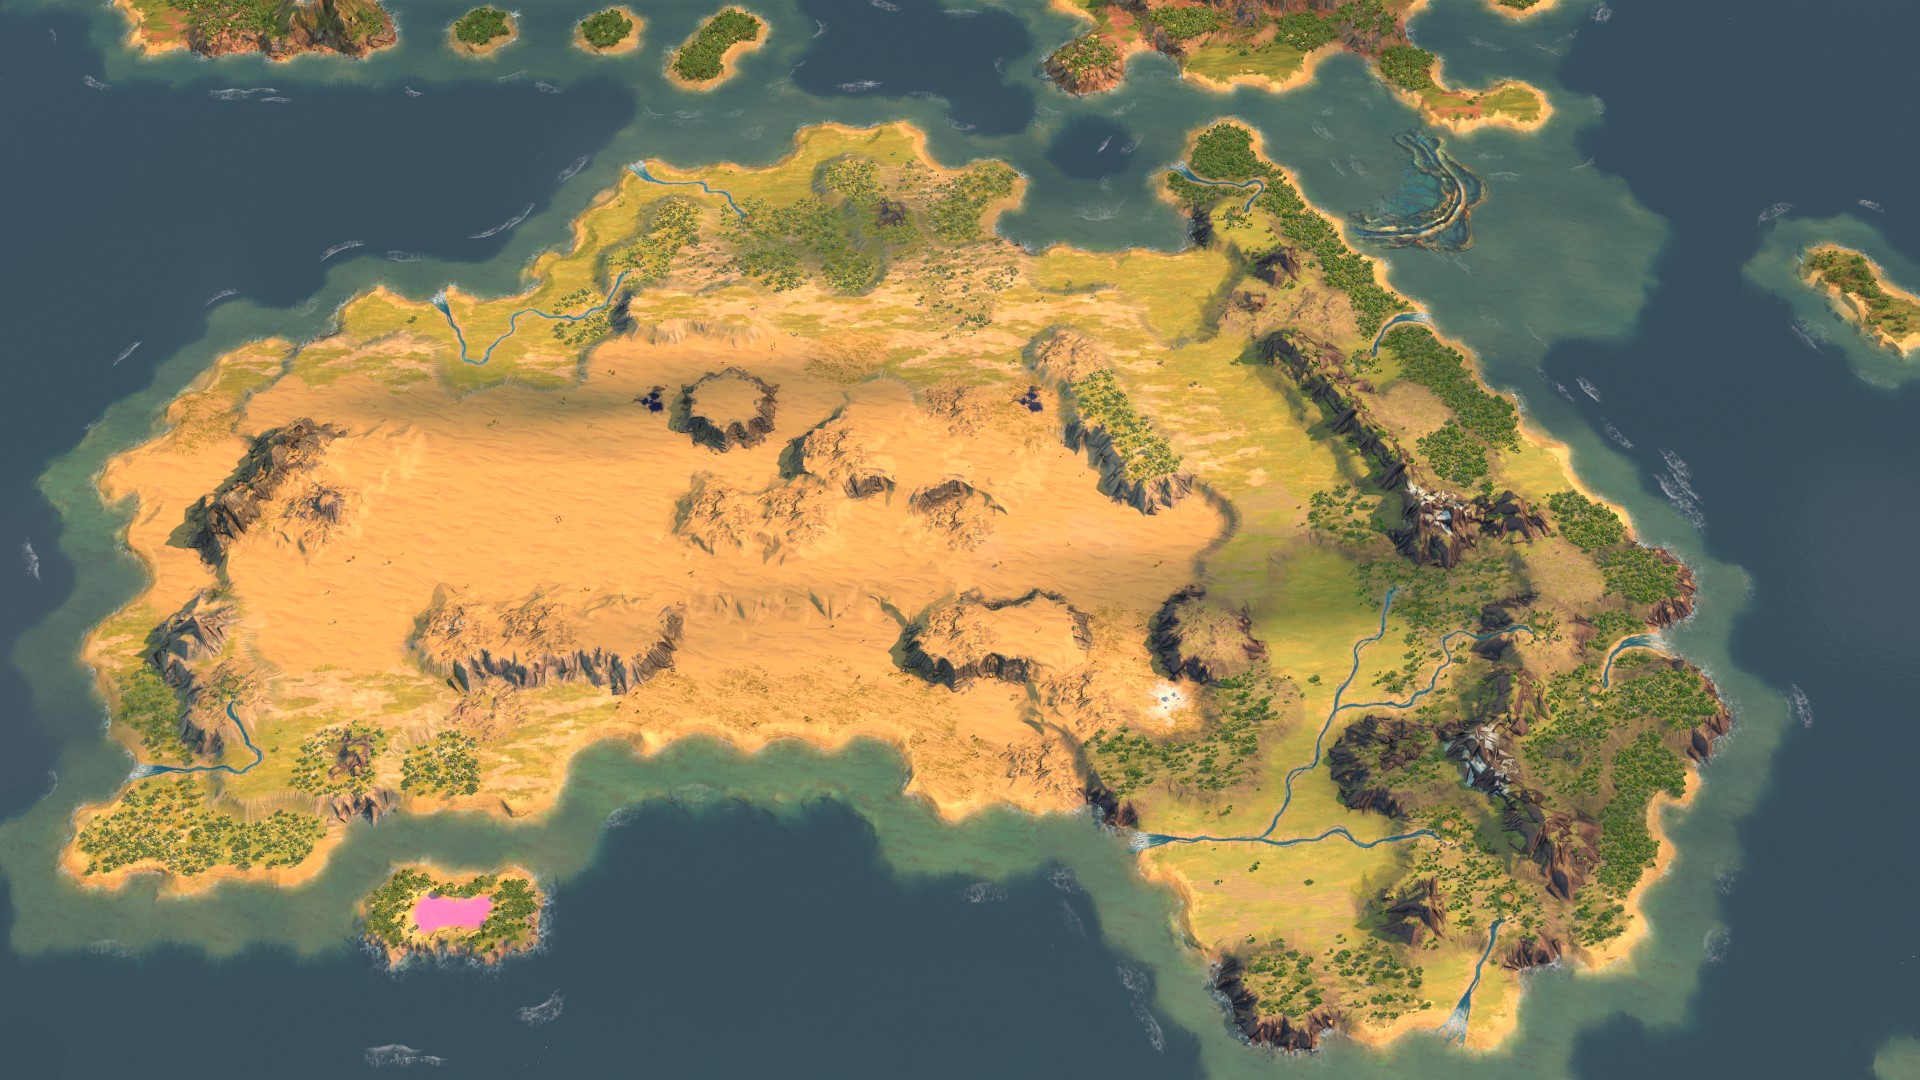 A Humankind modder has already created a huge map of Earth